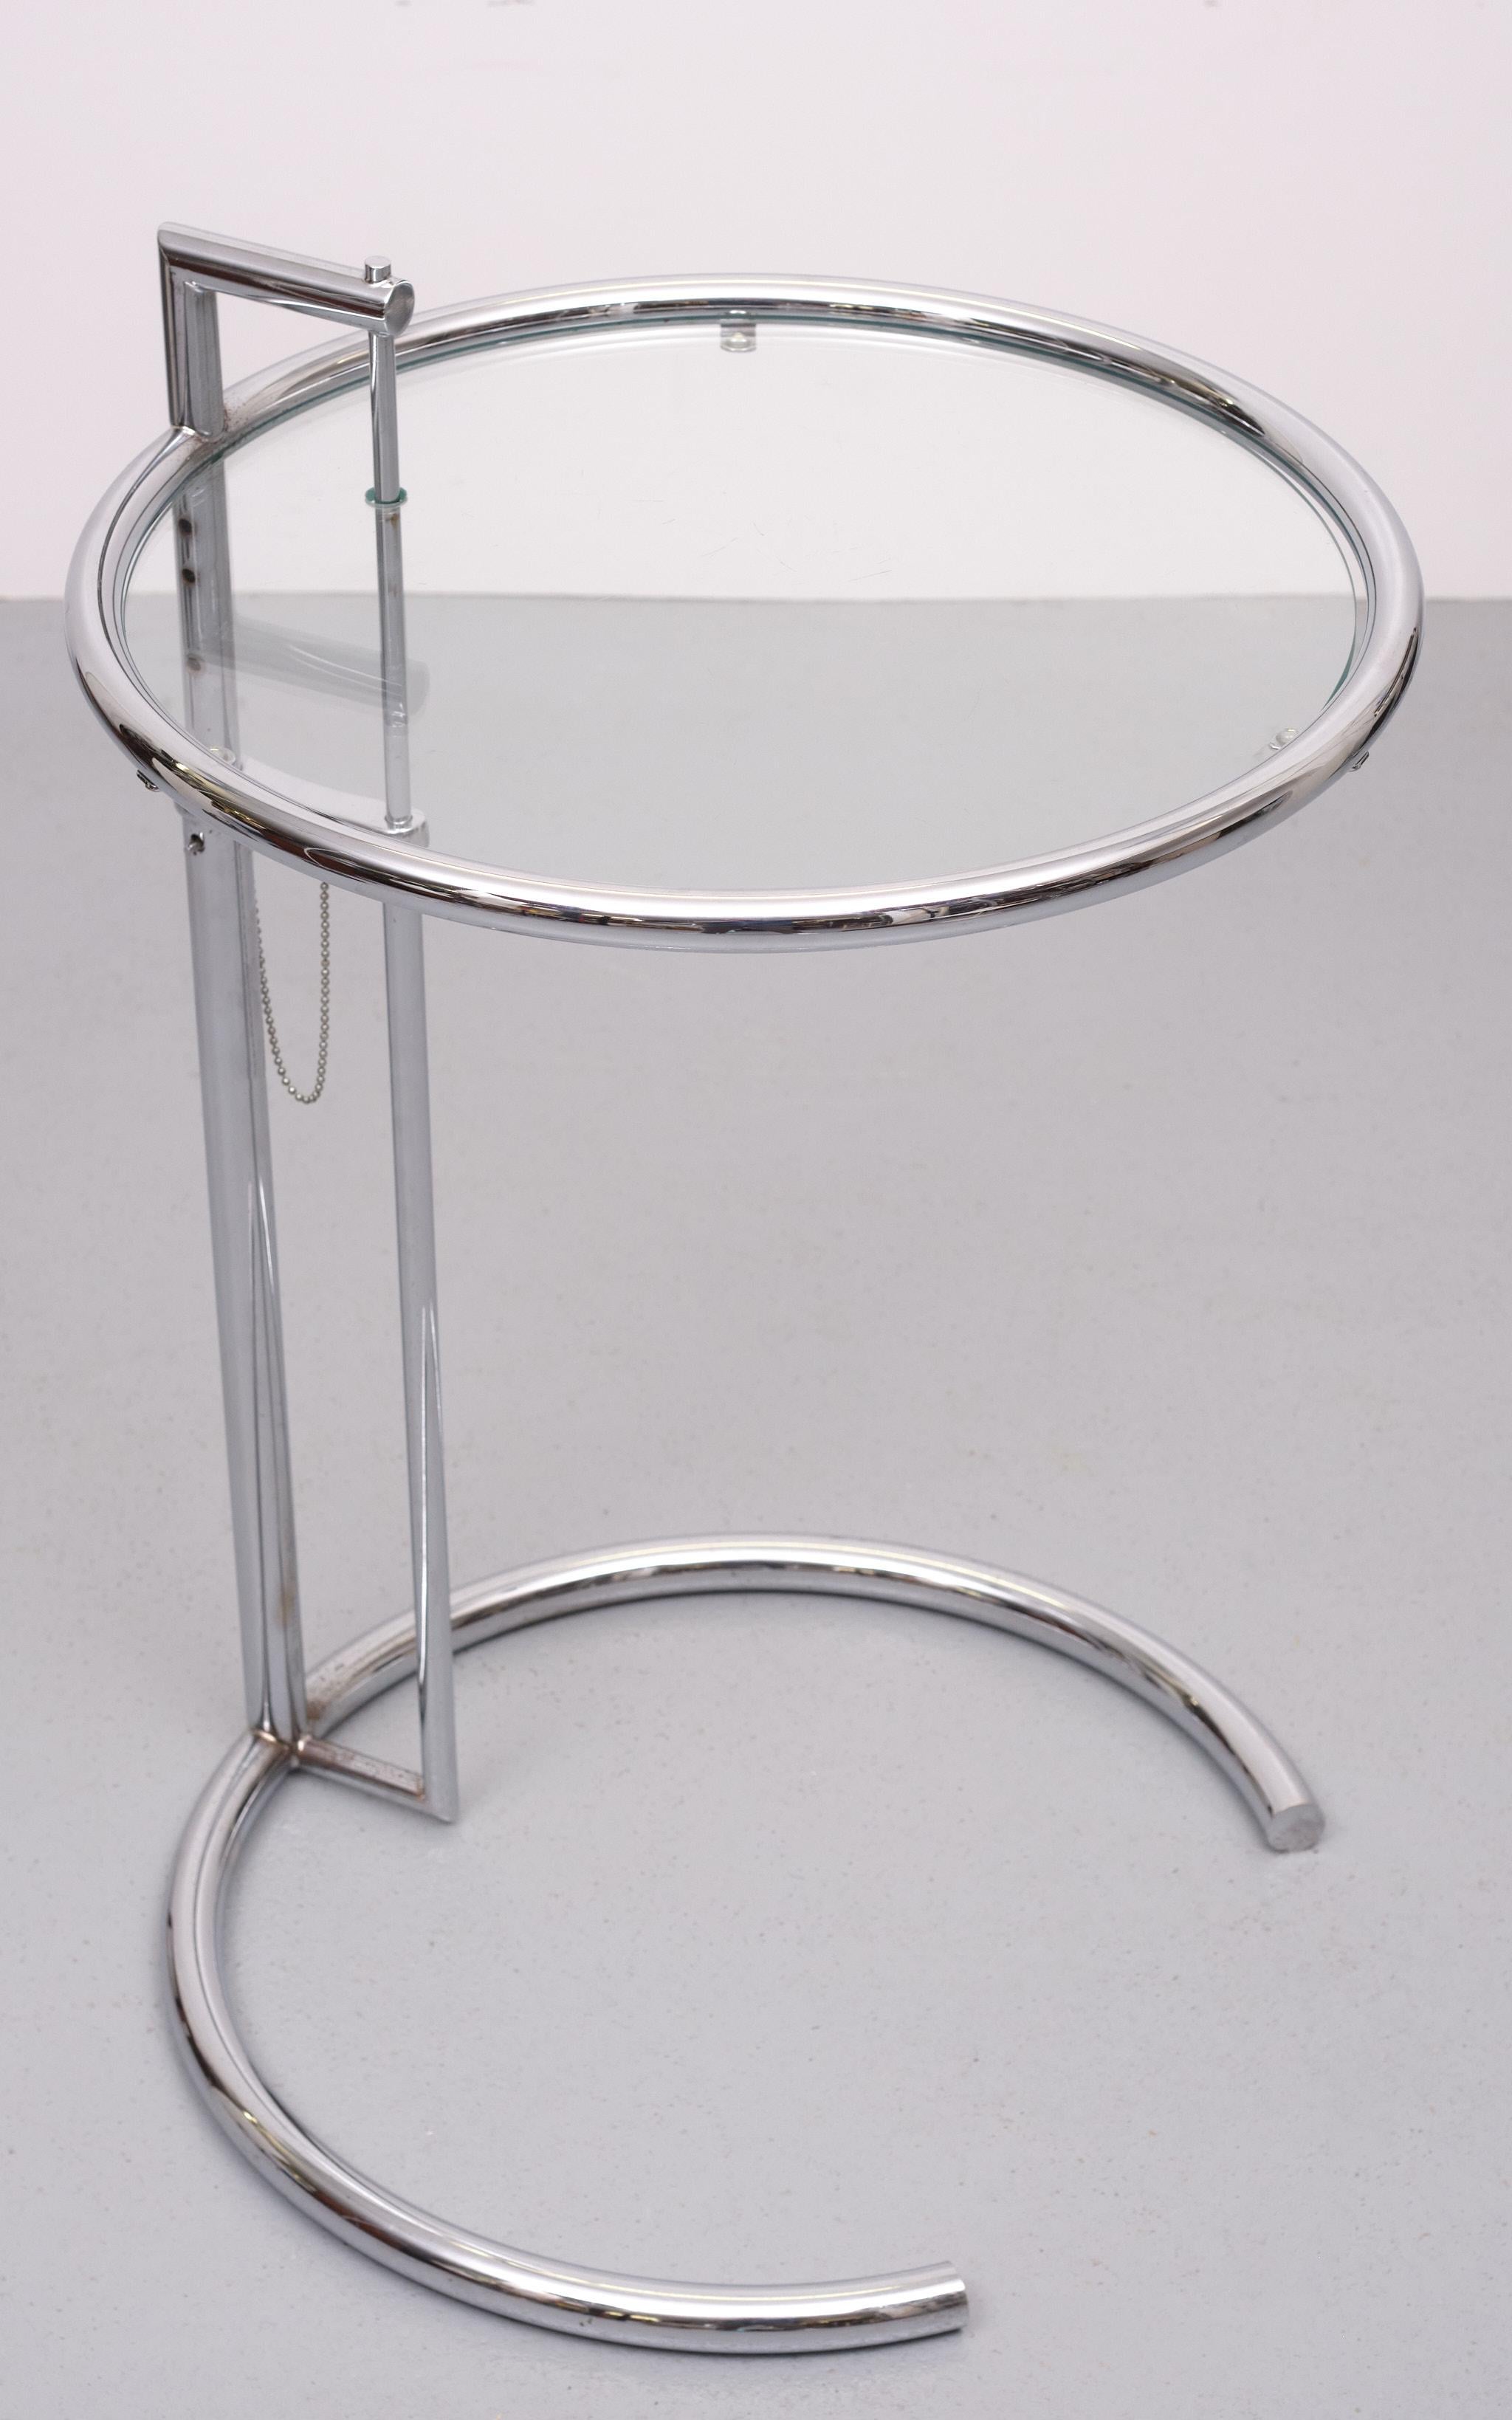 The elegant adjustable table by Eileen Gray stands out formally with its distinctive shape, while its height adjustability makes it not just aesthetically pleasing but functional perfect as a side table. With its clean lines and formal reduction the